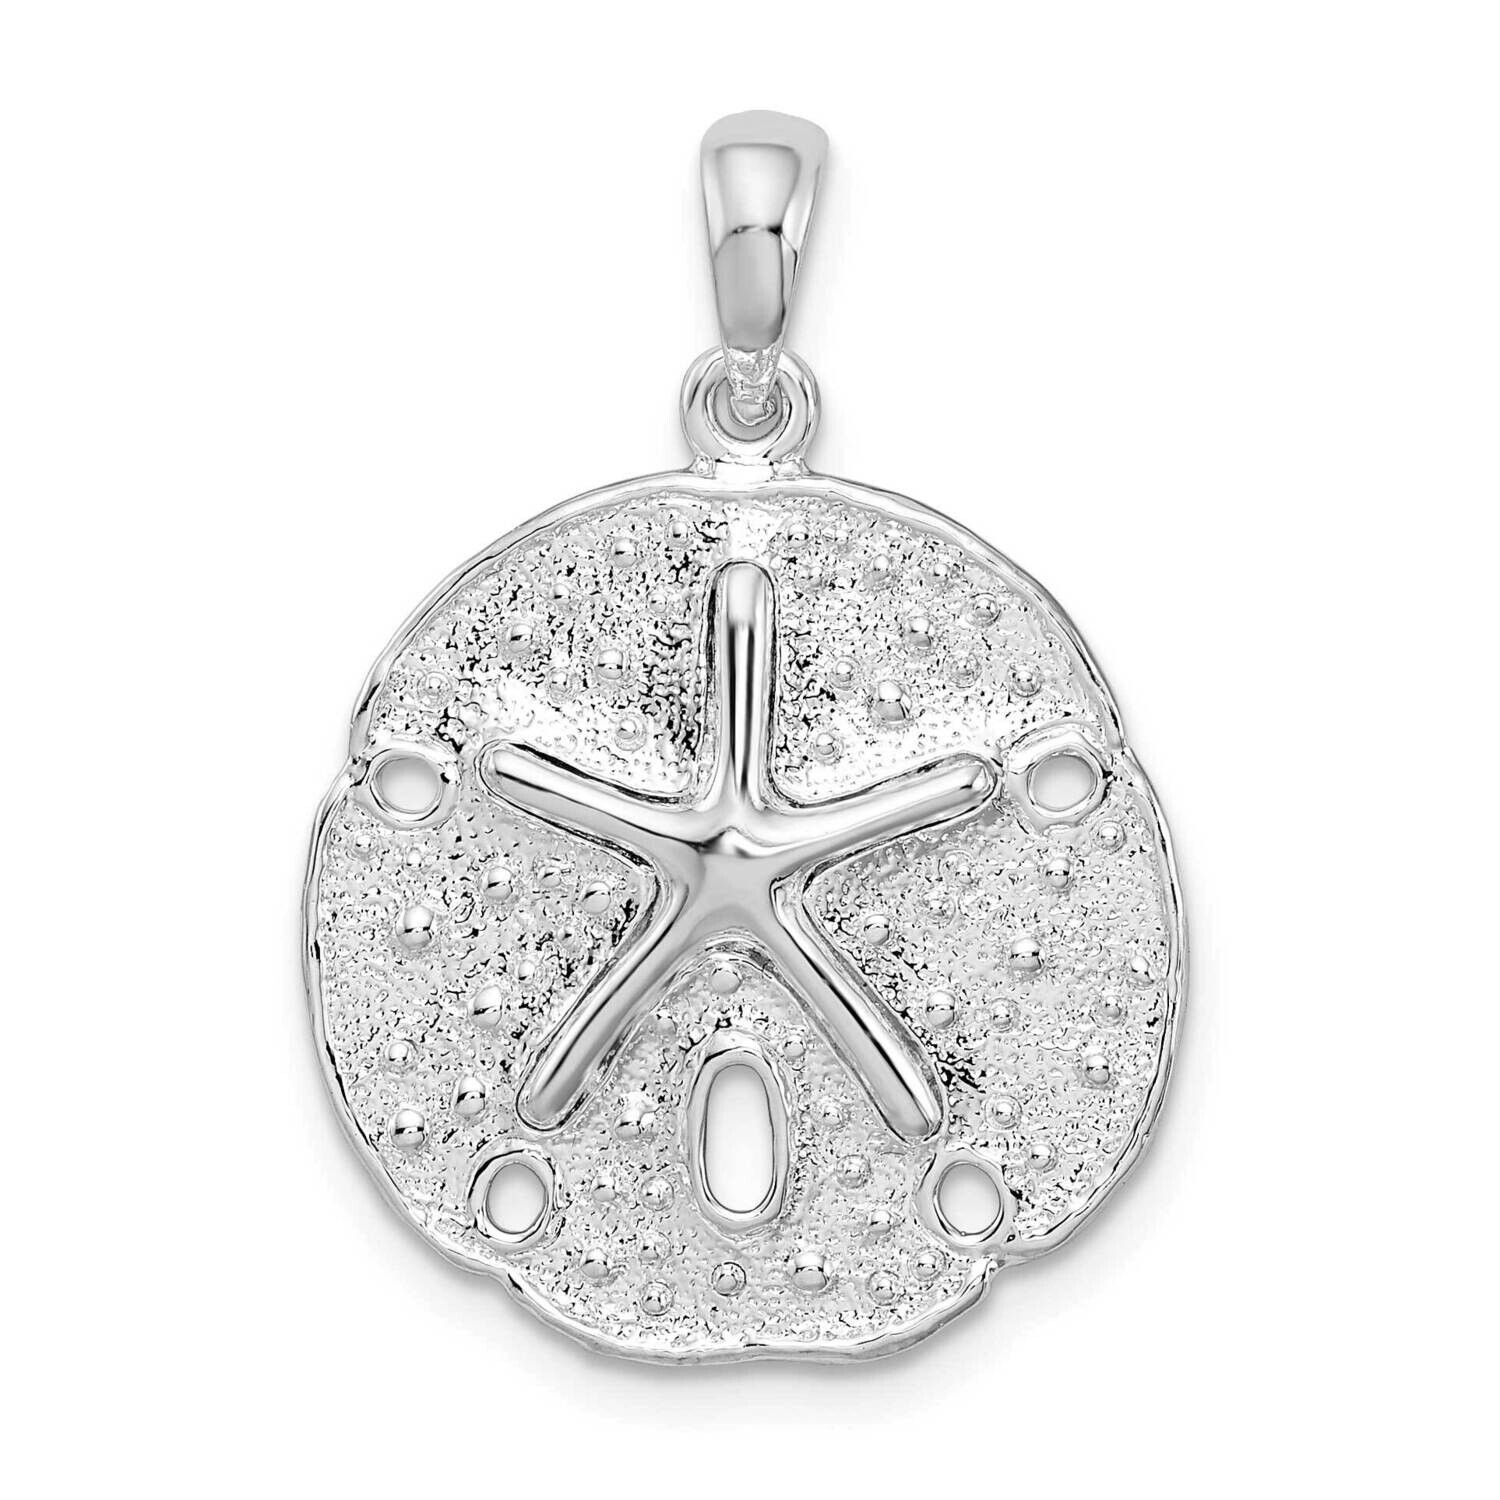 Textured SDollar Pendant Sterling Silver Polished QC10096